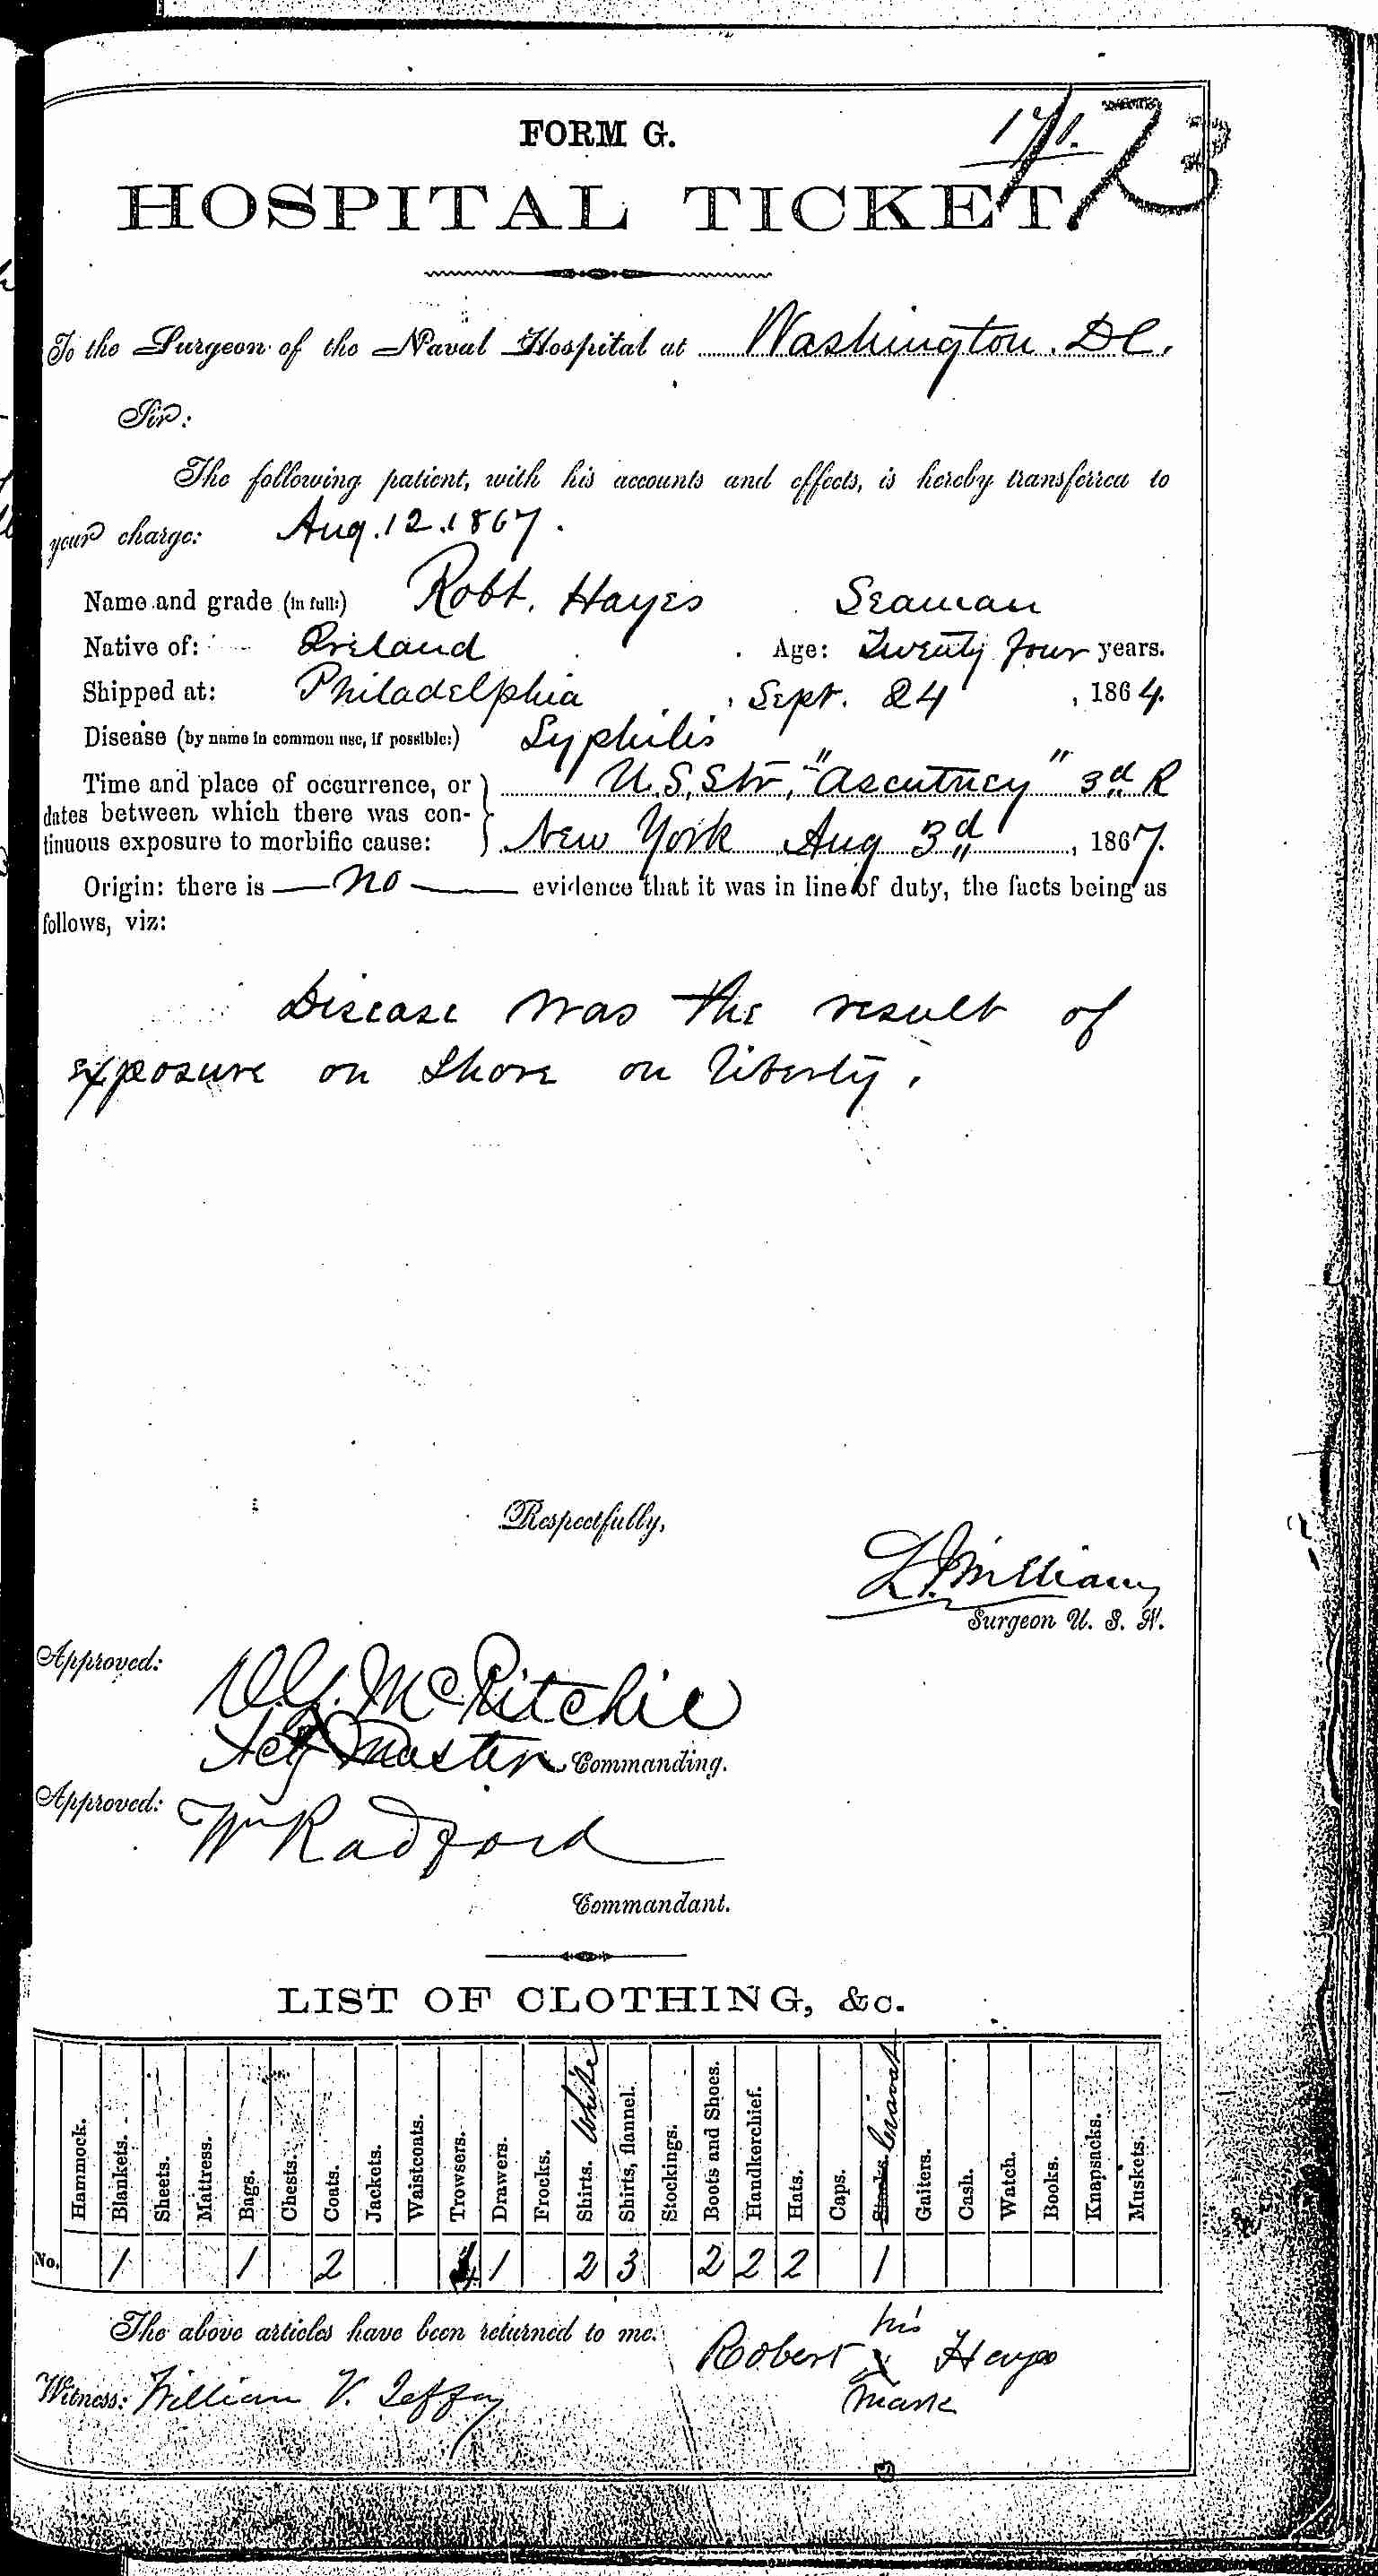 Entry for Robert Hayes (page 1 of 2) in the log Hospital Tickets and Case Papers - Naval Hospital - Washington, D.C. - 1866-68